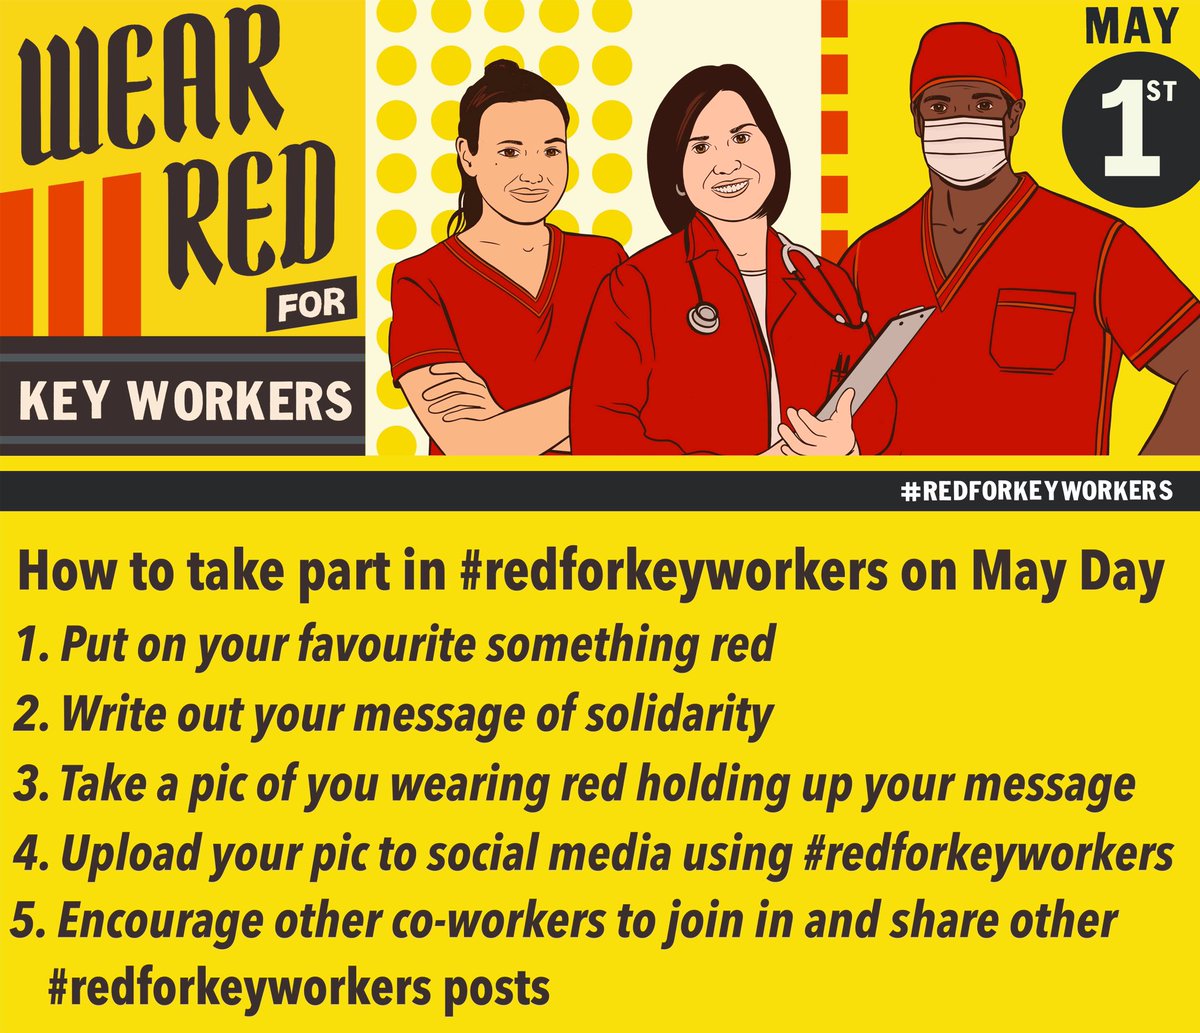 Follow our 5 steps below to get involved in #redforkeyworkers this #MayDay2020 👇 

#CoronavirusLockdown #coronavirus #keyworkers #keyworkerHeroes